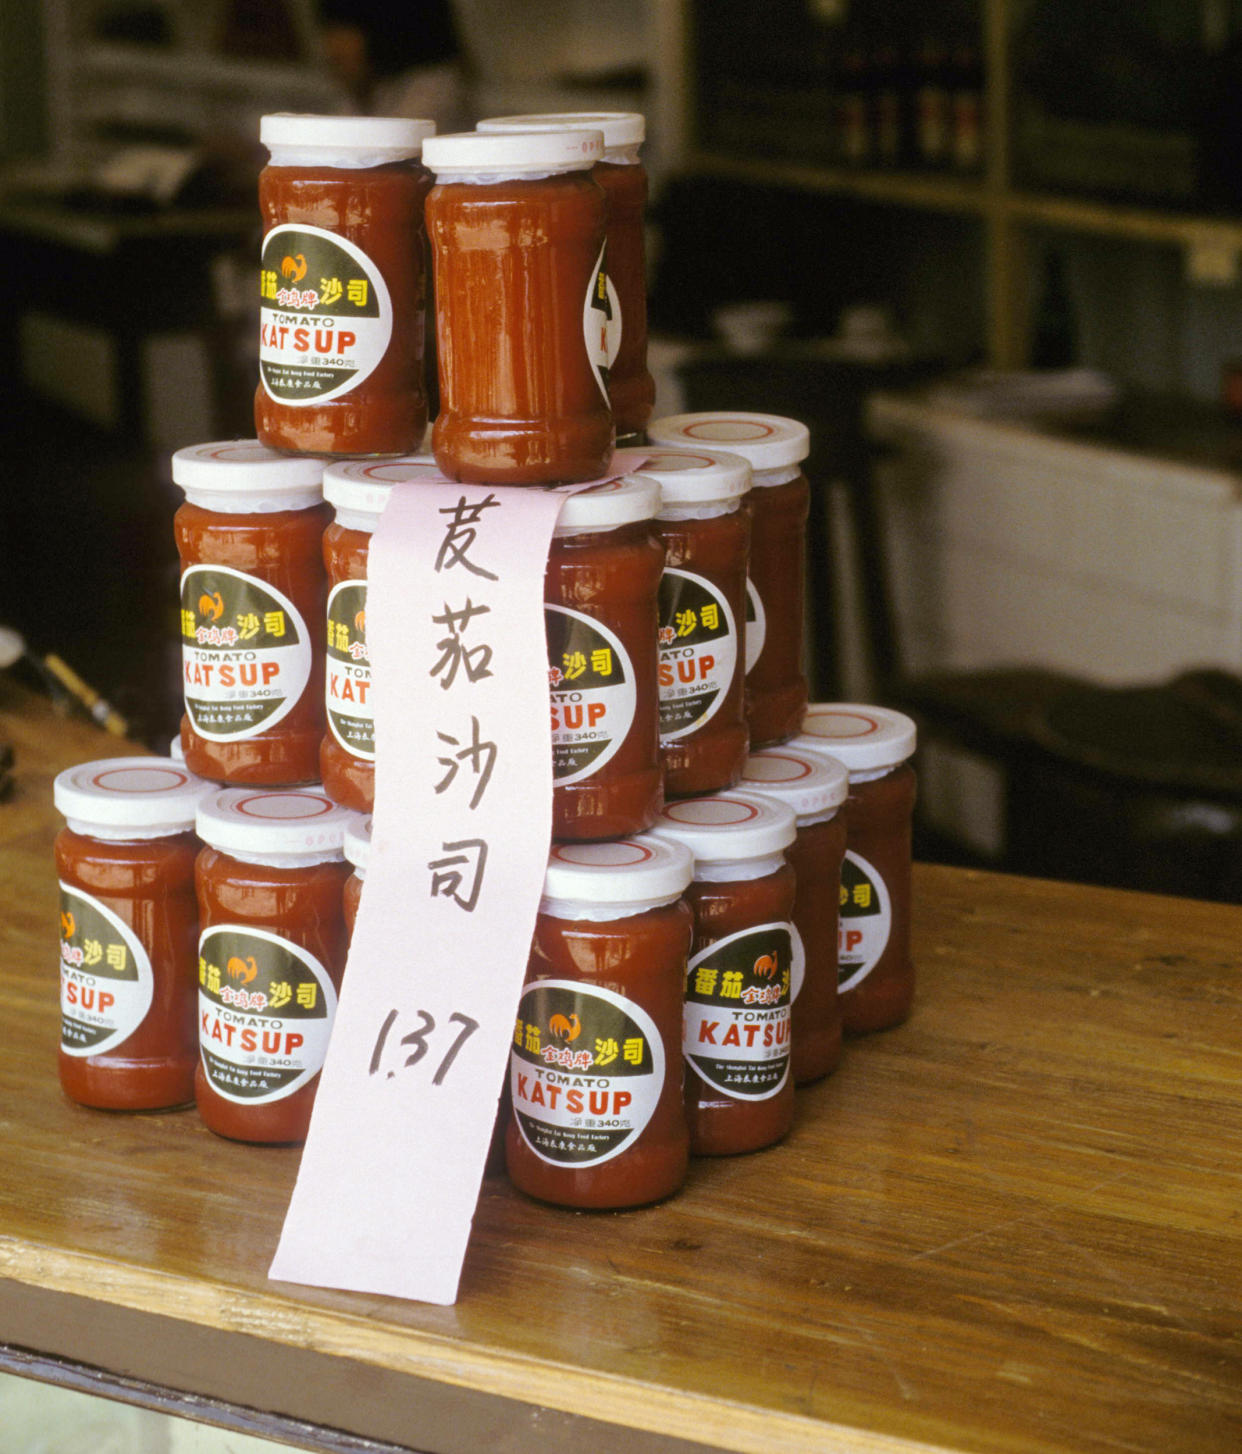 Hangzhou (China). Sale of ketchup pots (Marie Mathelin / Roger Viollet via Getty Images)